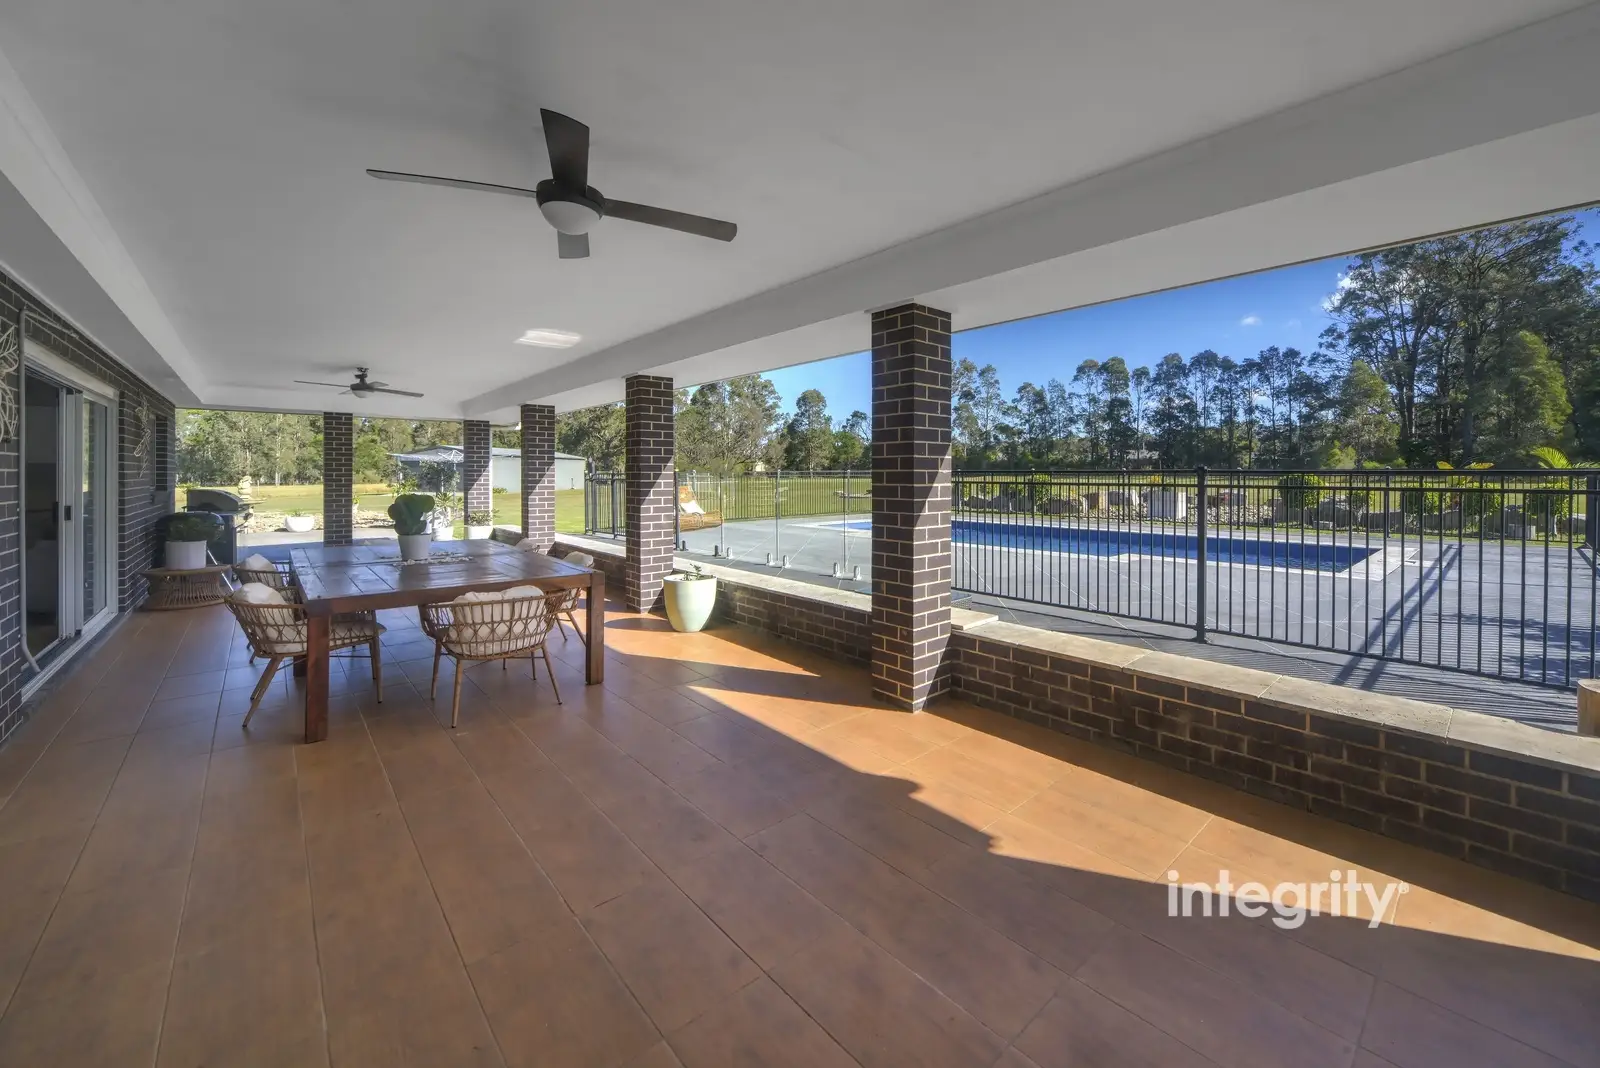 25 Kalatta Grove, Worrigee For Sale by Integrity Real Estate - image 13